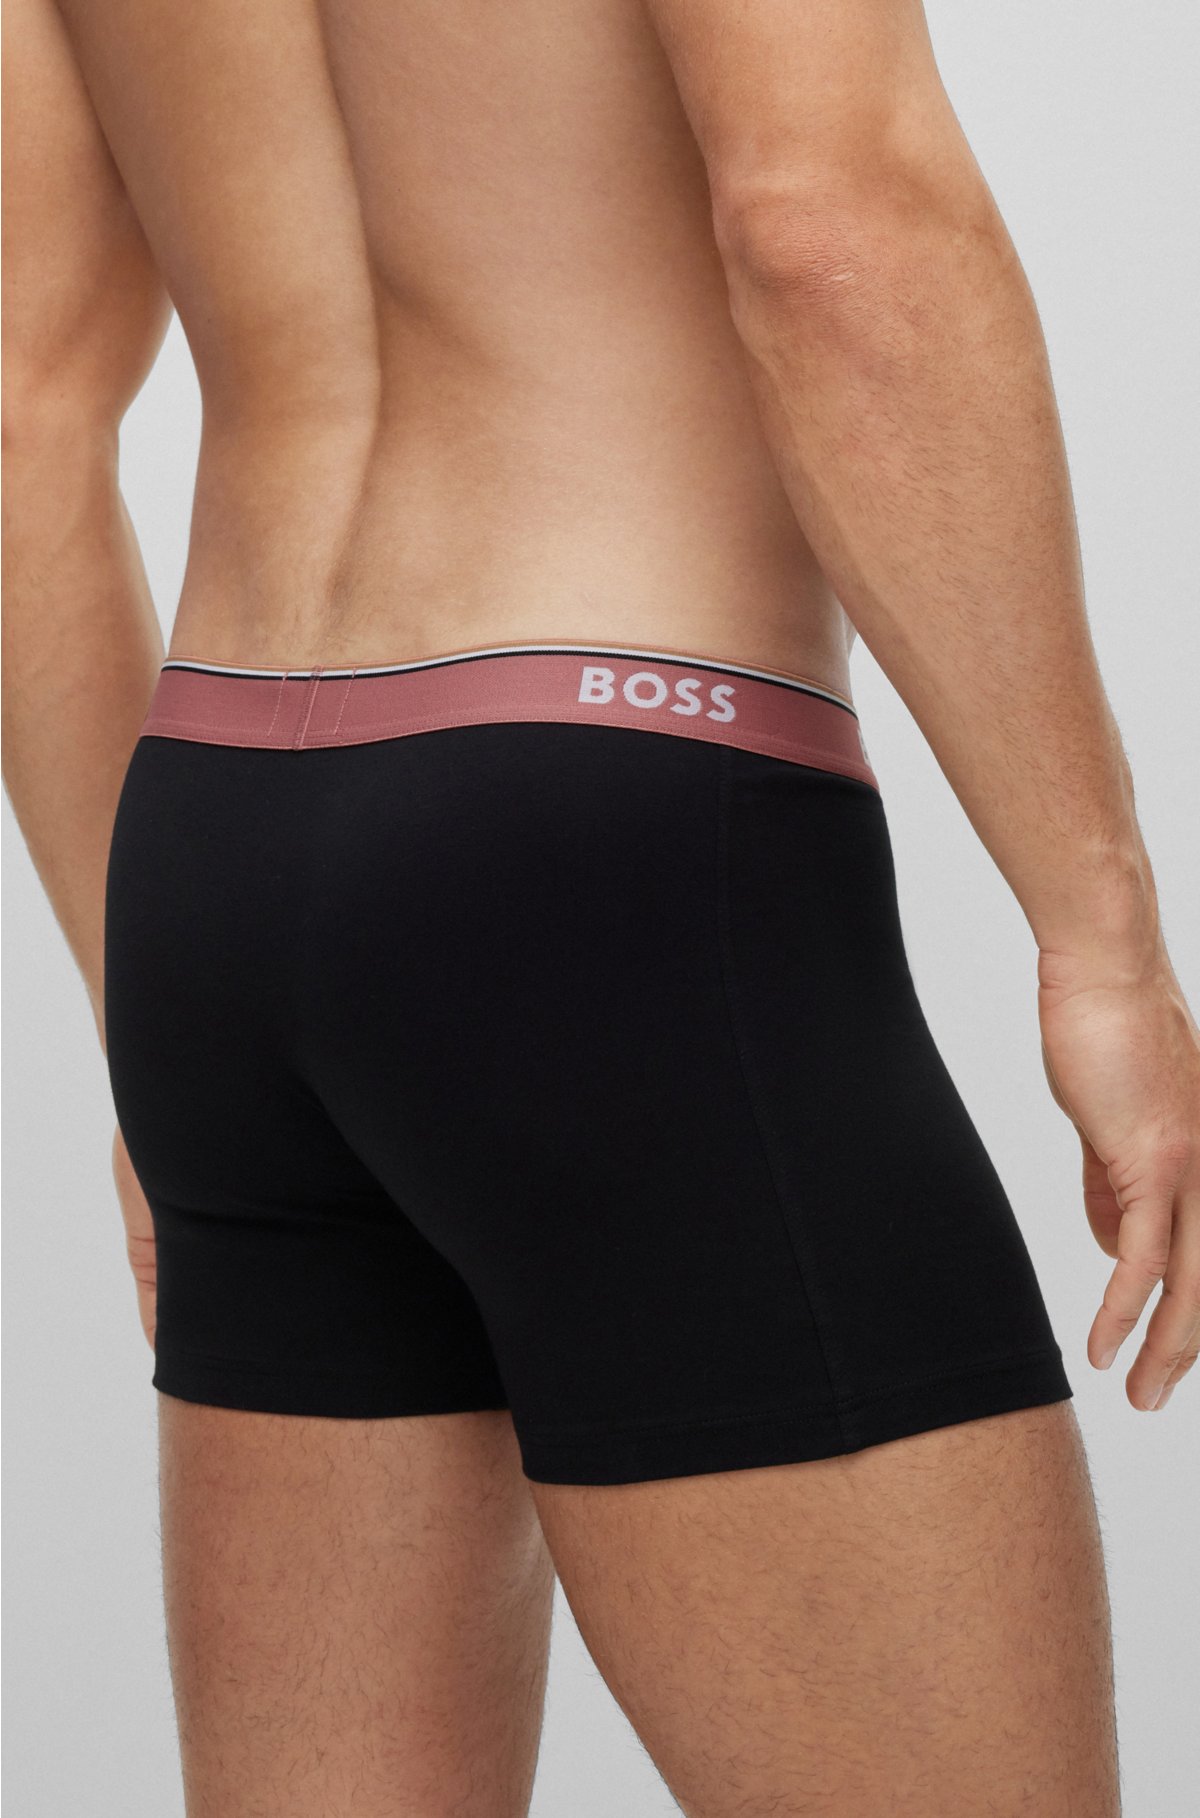 BOSS logo of boxer - briefs Three-pack waistbands with